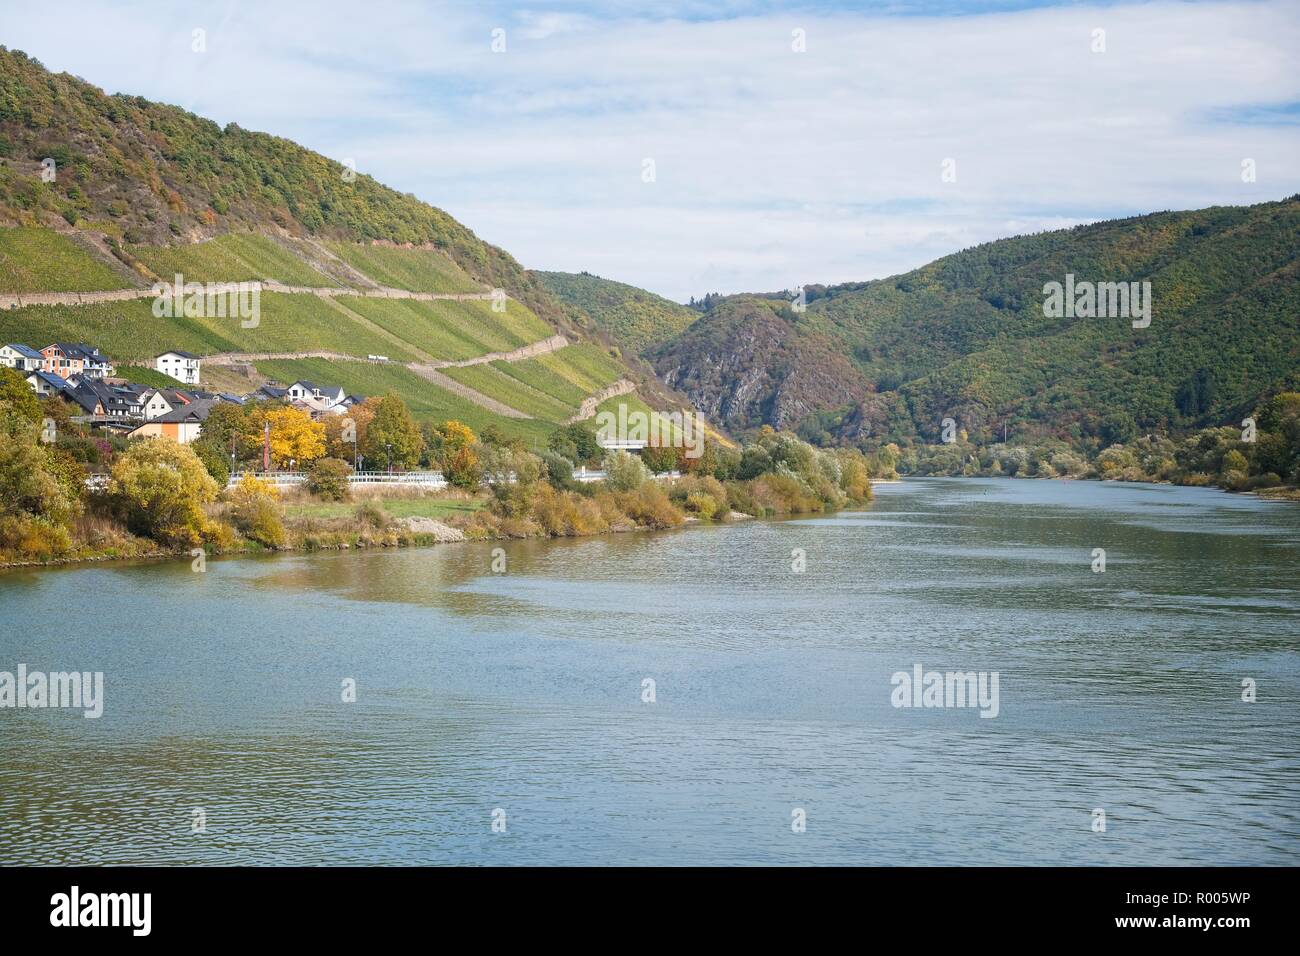 KARDEN TOWN AND VINEYARDS ABOVE THE RIVER MOSEL GERMANY Stock Photo